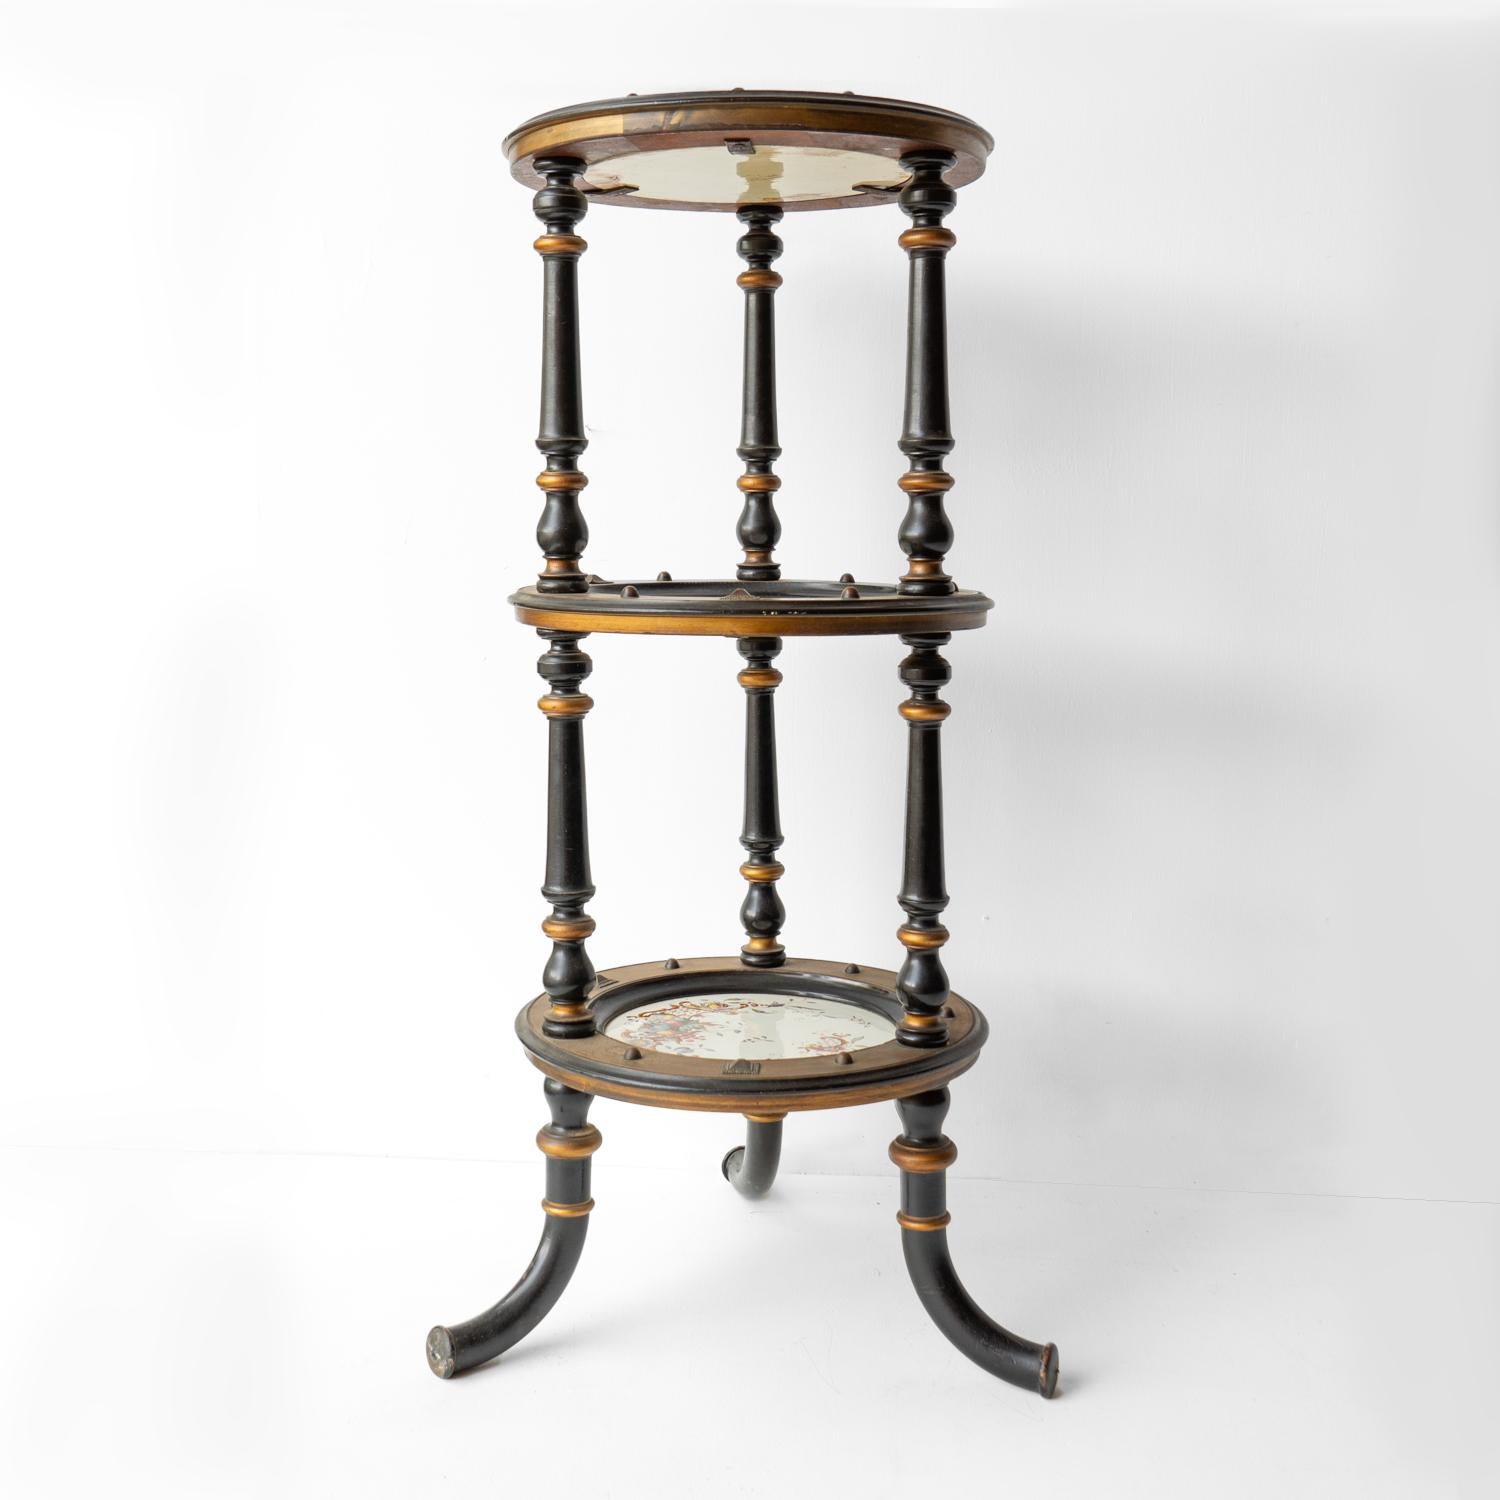 Aesthetic Movement Three Tiered Cake Stand, 19th Century Victorian cake display For Sale 4